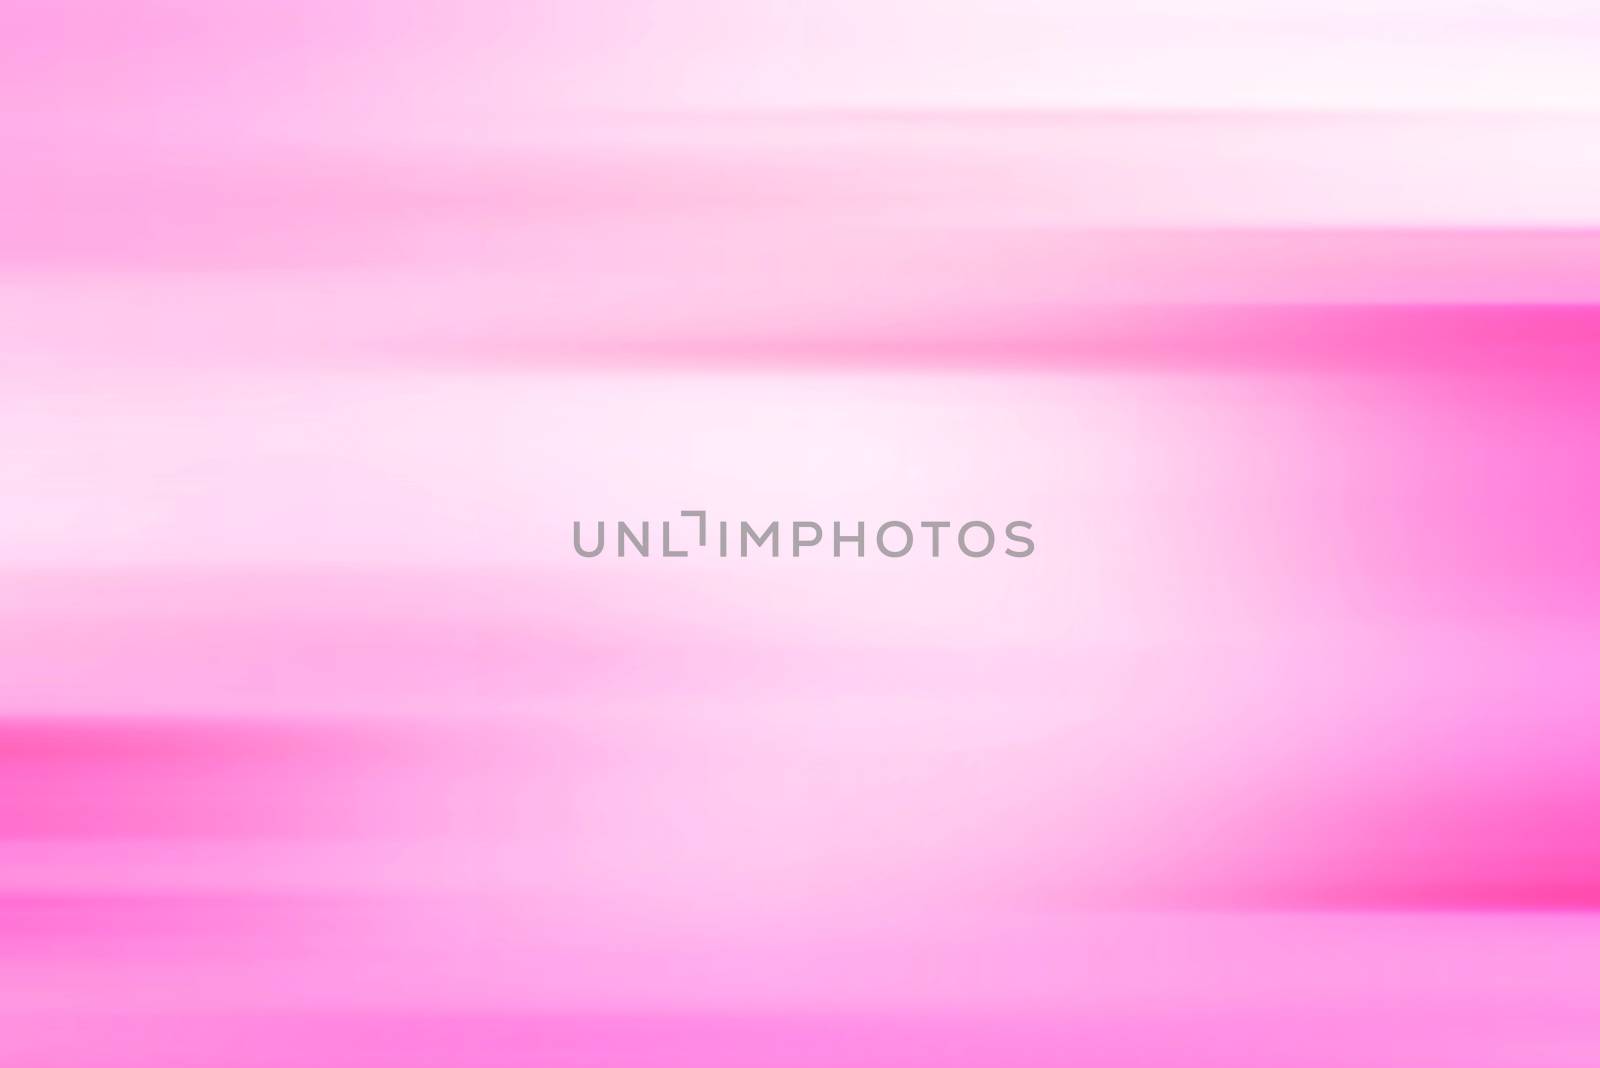 Abstract background for design. Abstract pink illustration